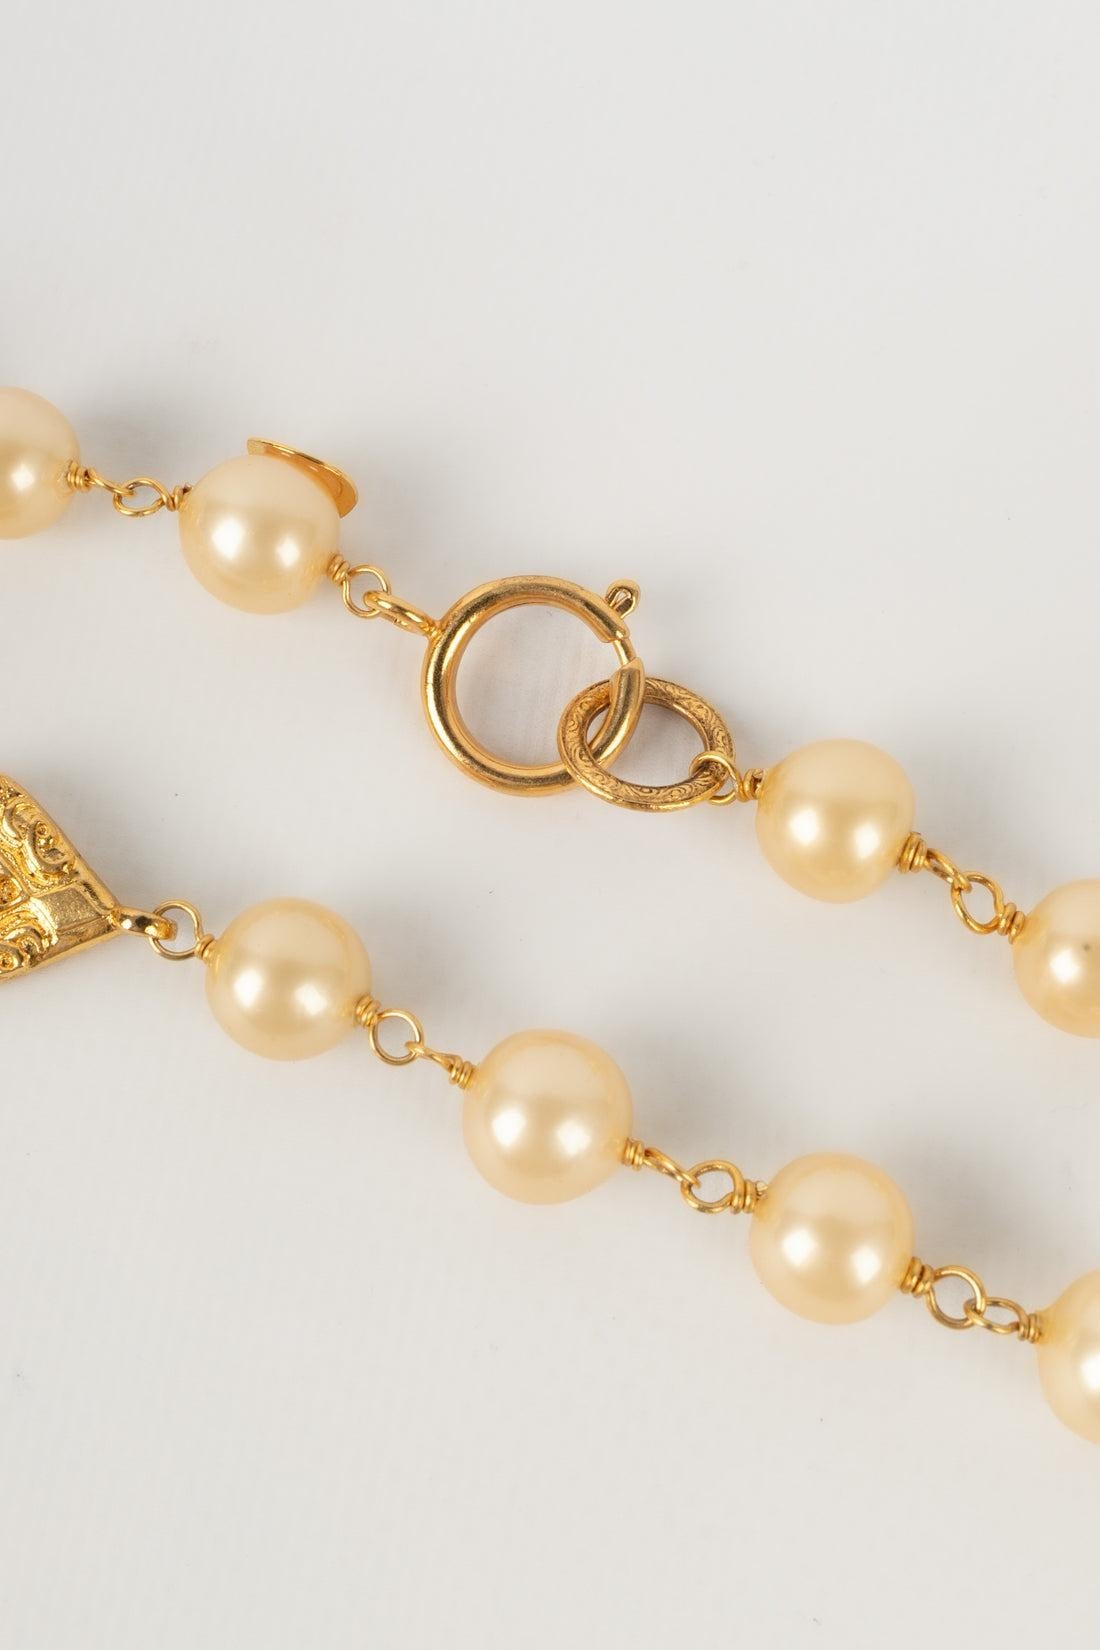 Chanel Costume Pearls Necklace For Sale 1